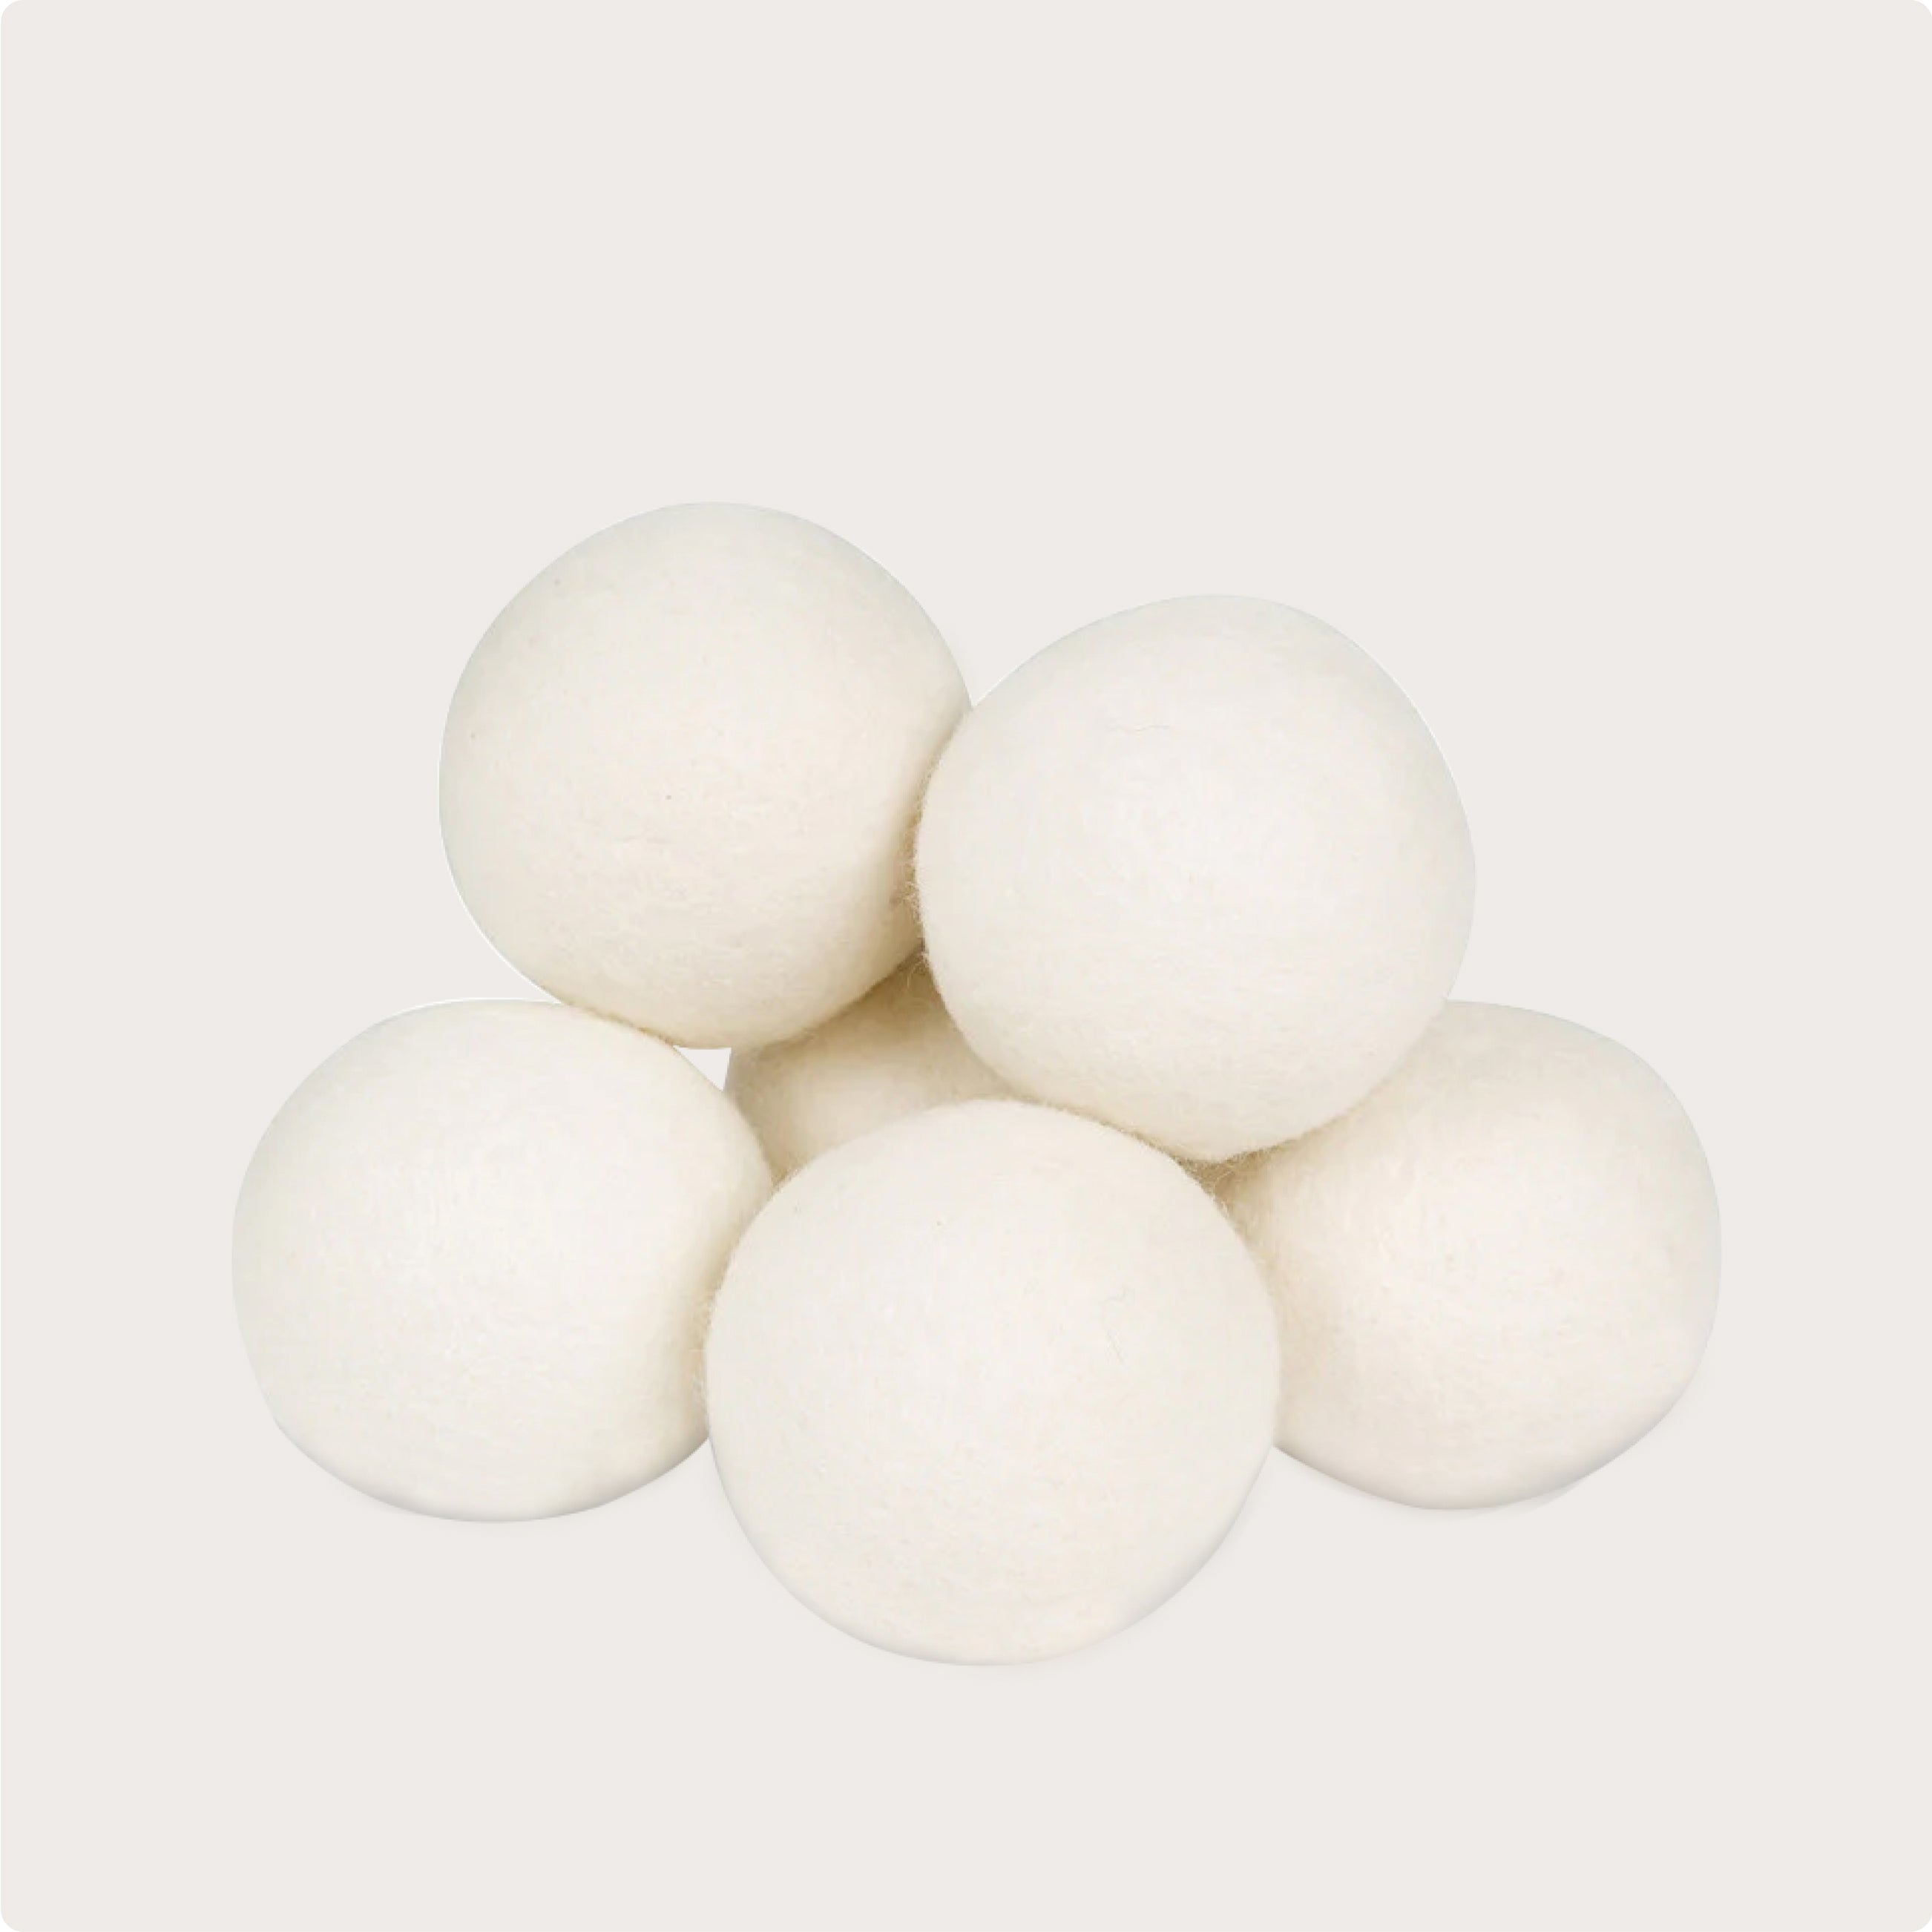 Wool Dryer Balls - Natural Fabric Softener, Reusable, Reduces Clothing  Wrinkles and Saves Drying Time. The Large Dryer Ball is a Better  Alternative